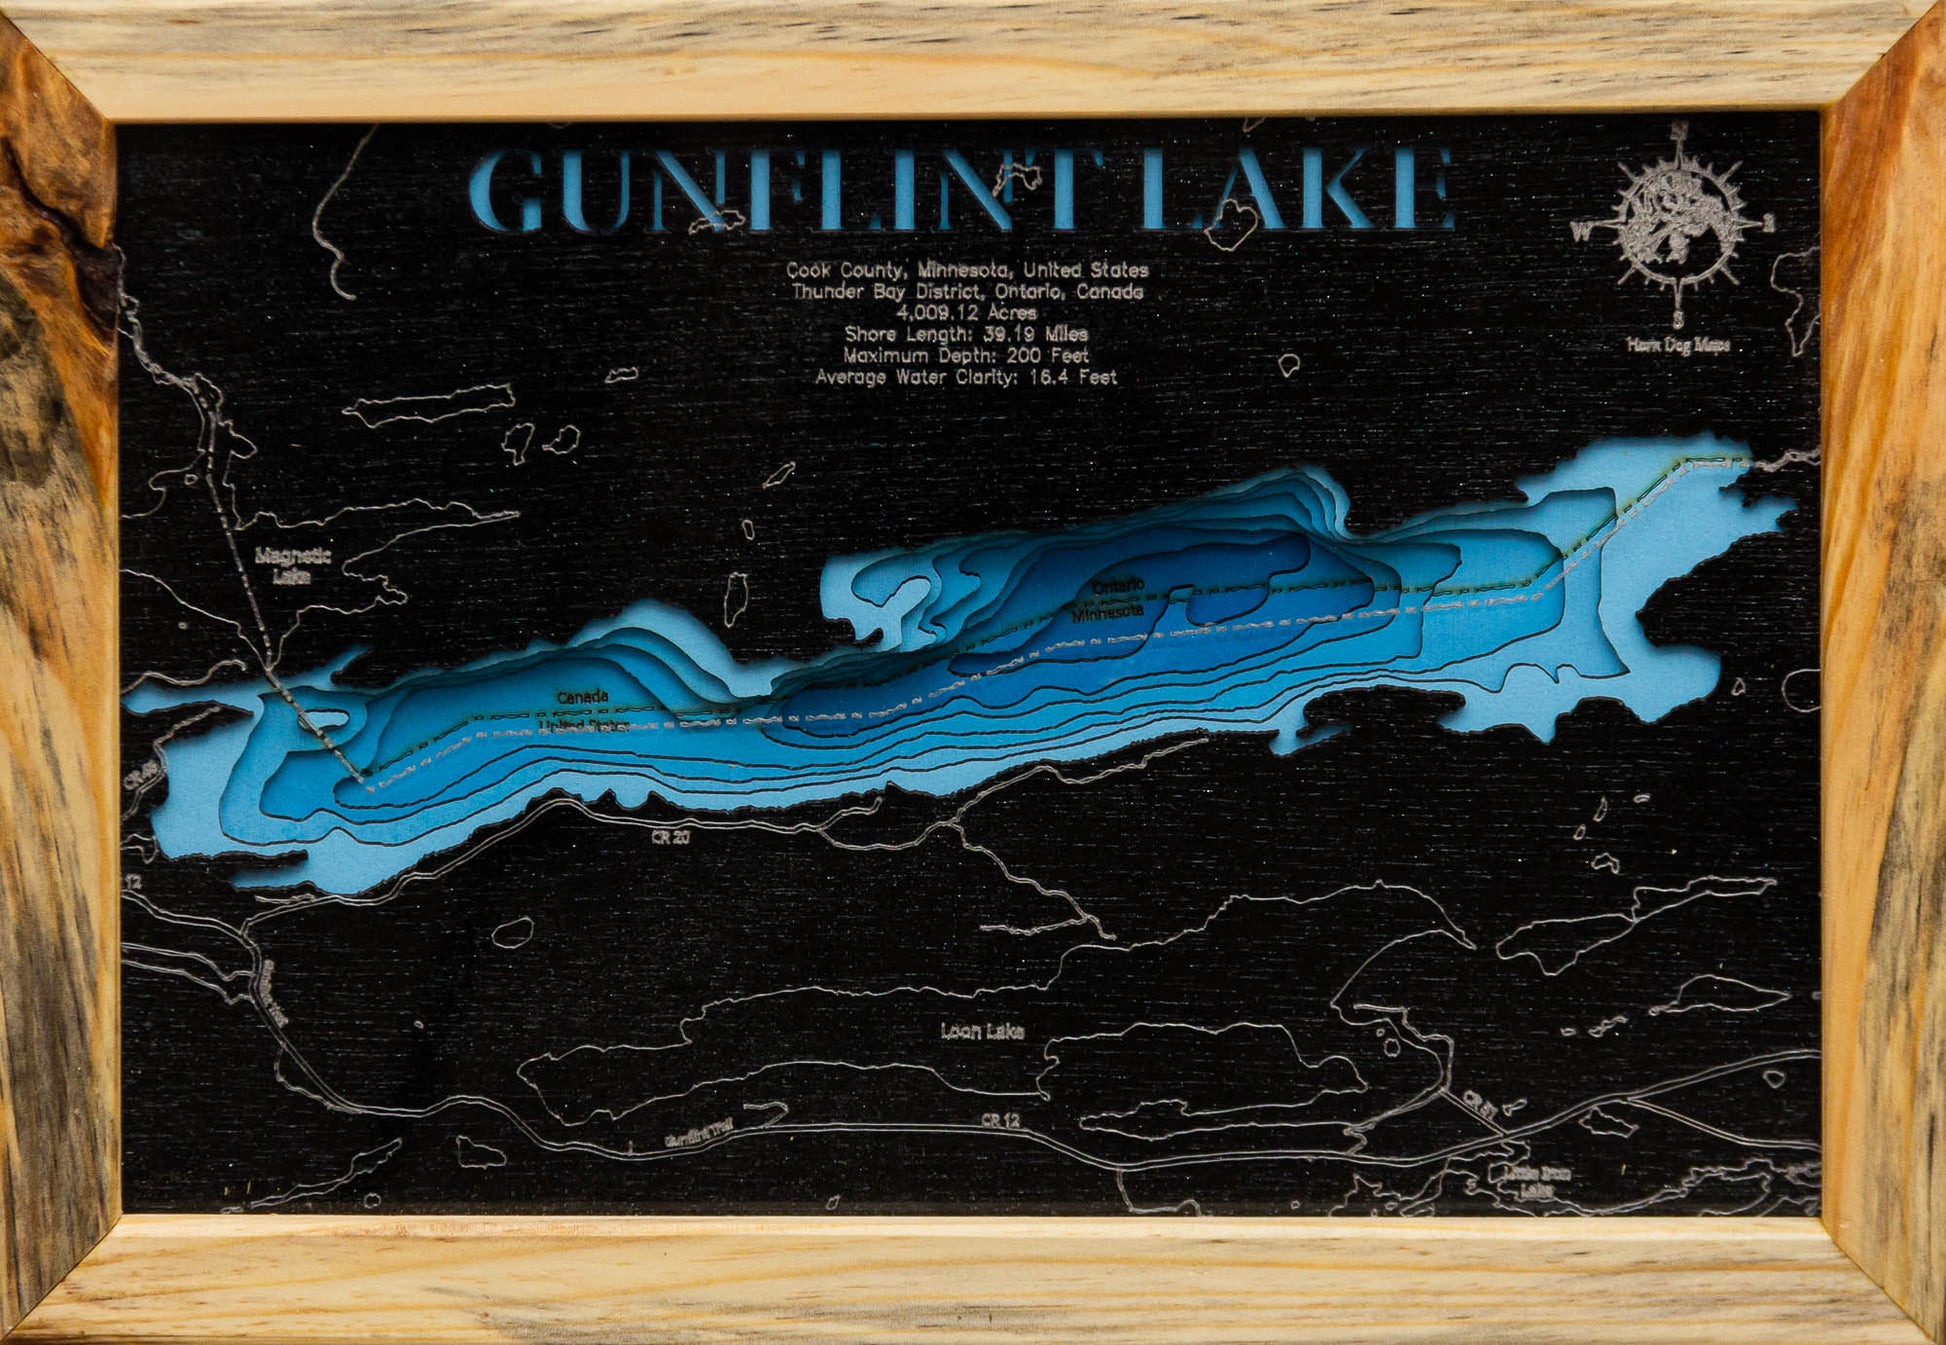 Gunflint Lake in Cook County, MN, Thunder Bay District, ON